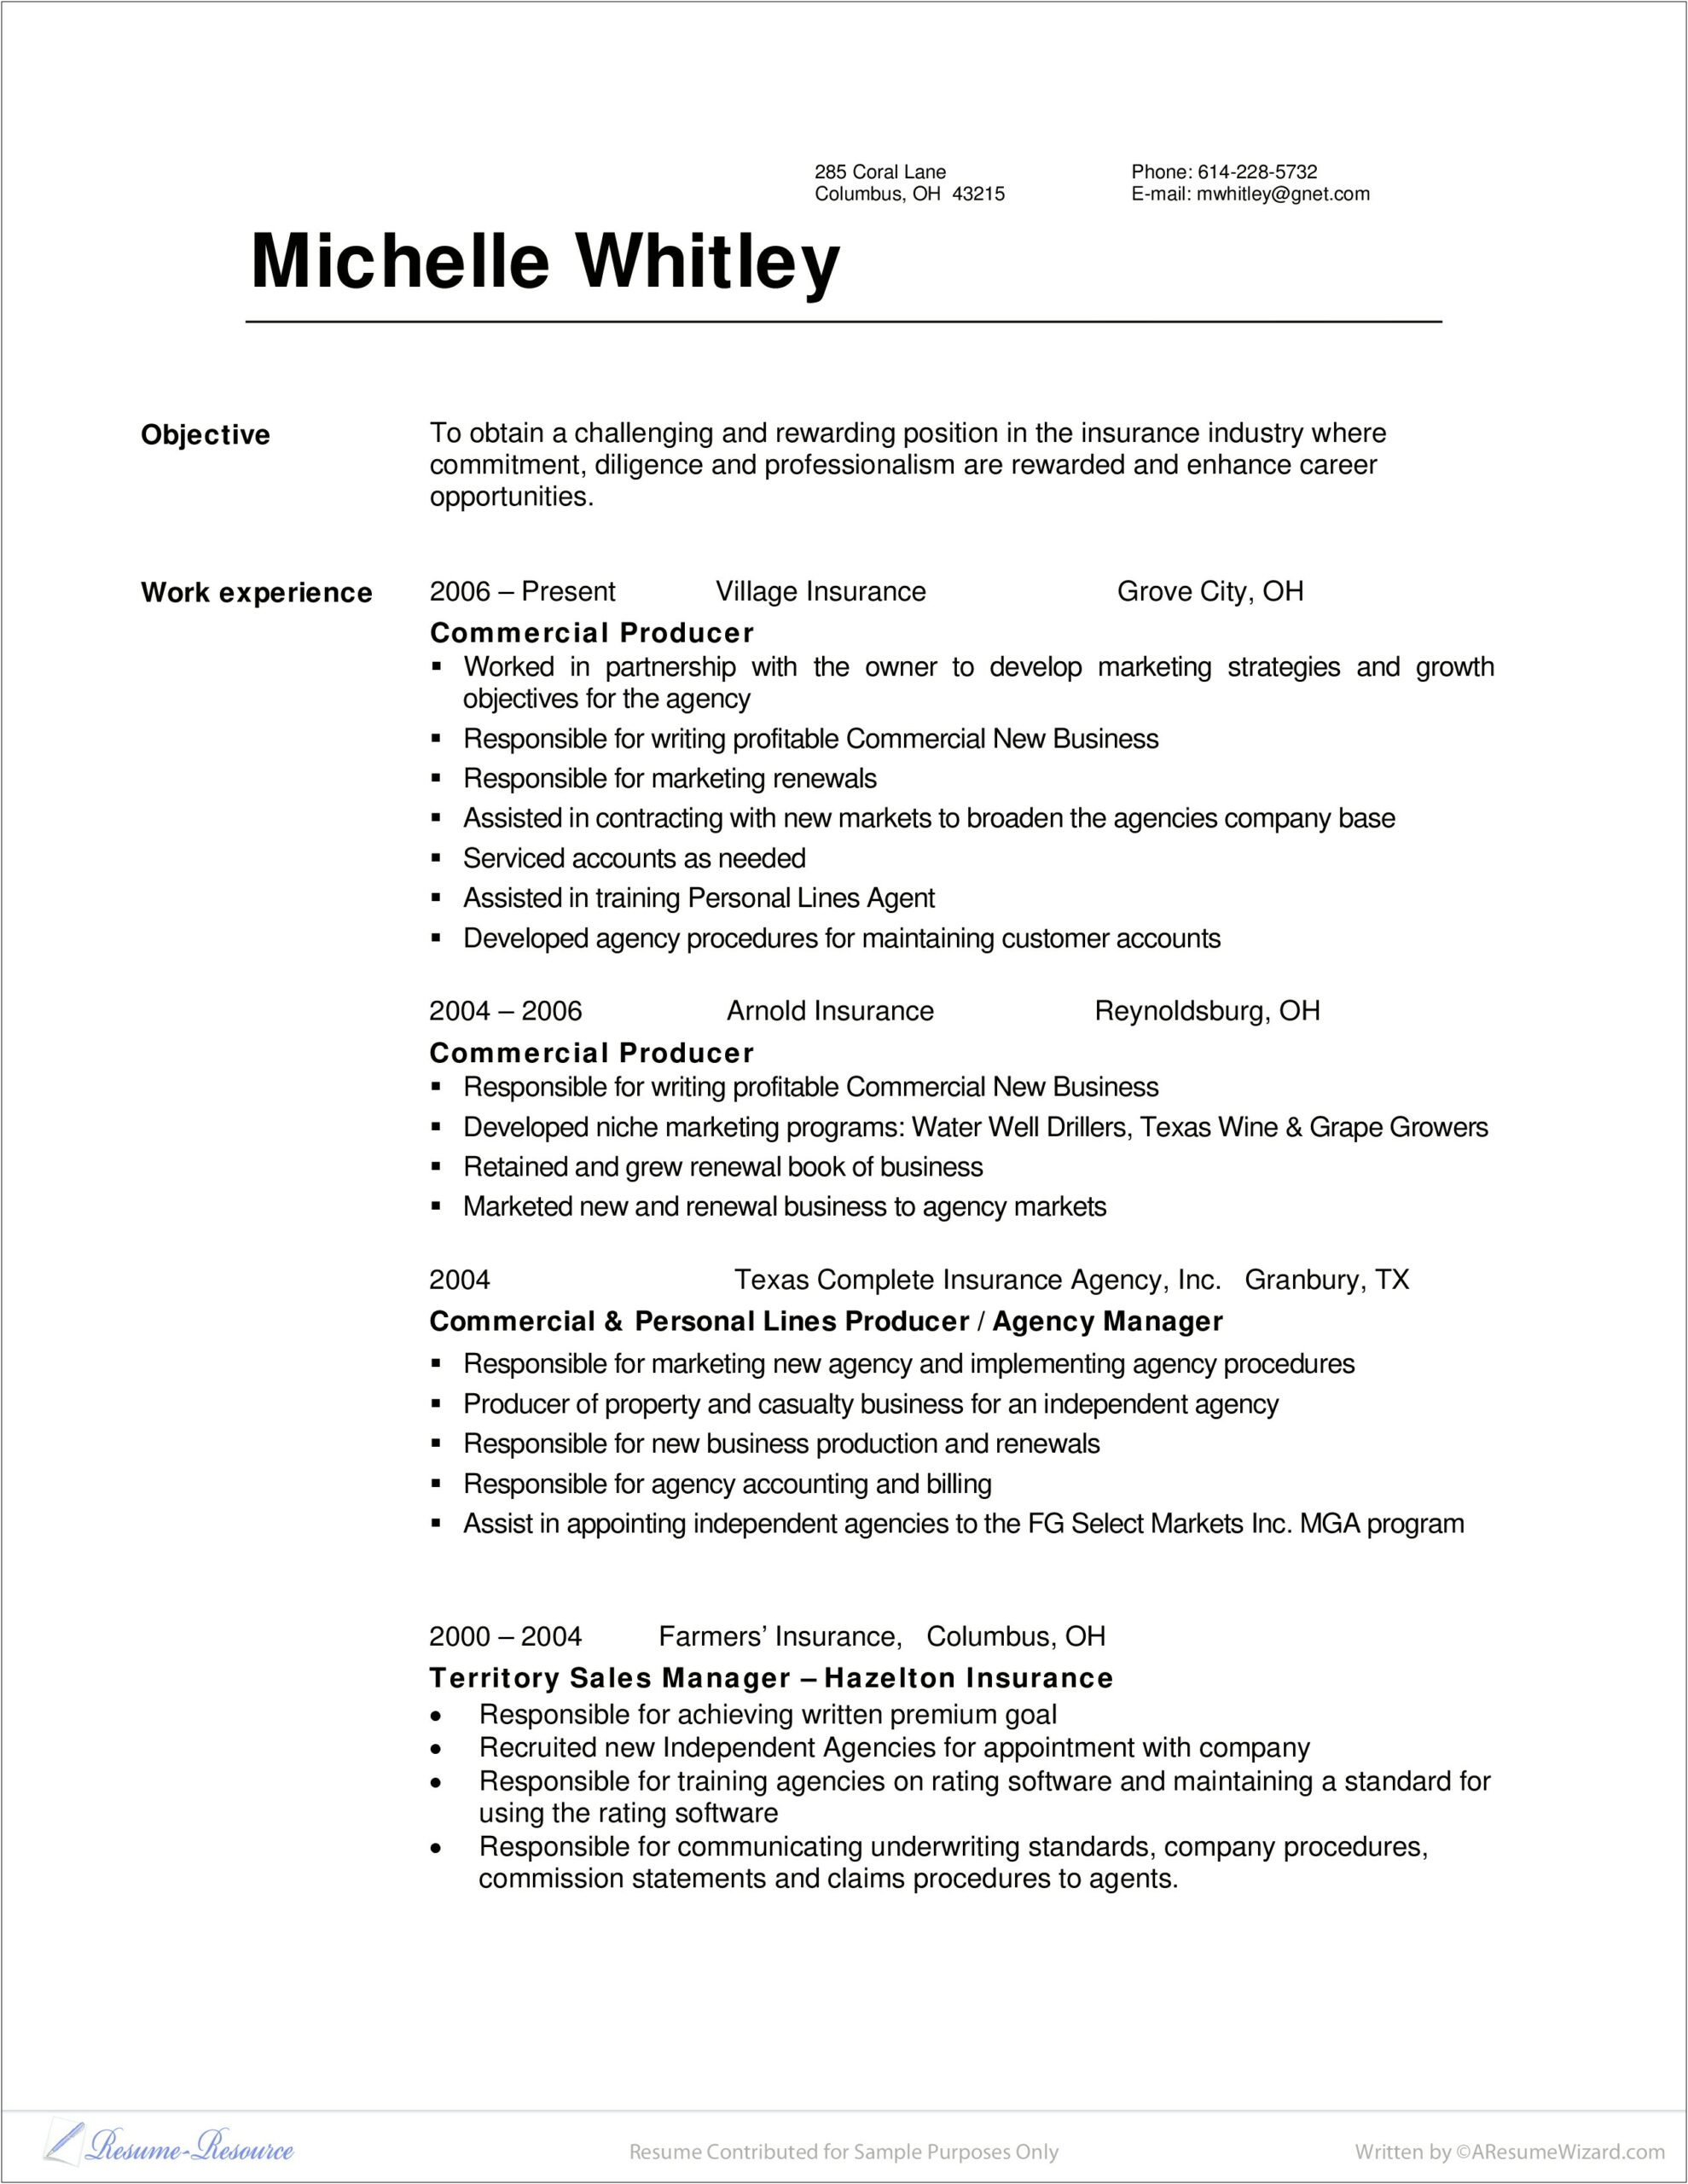 Personal Trainer Resume Templates Free